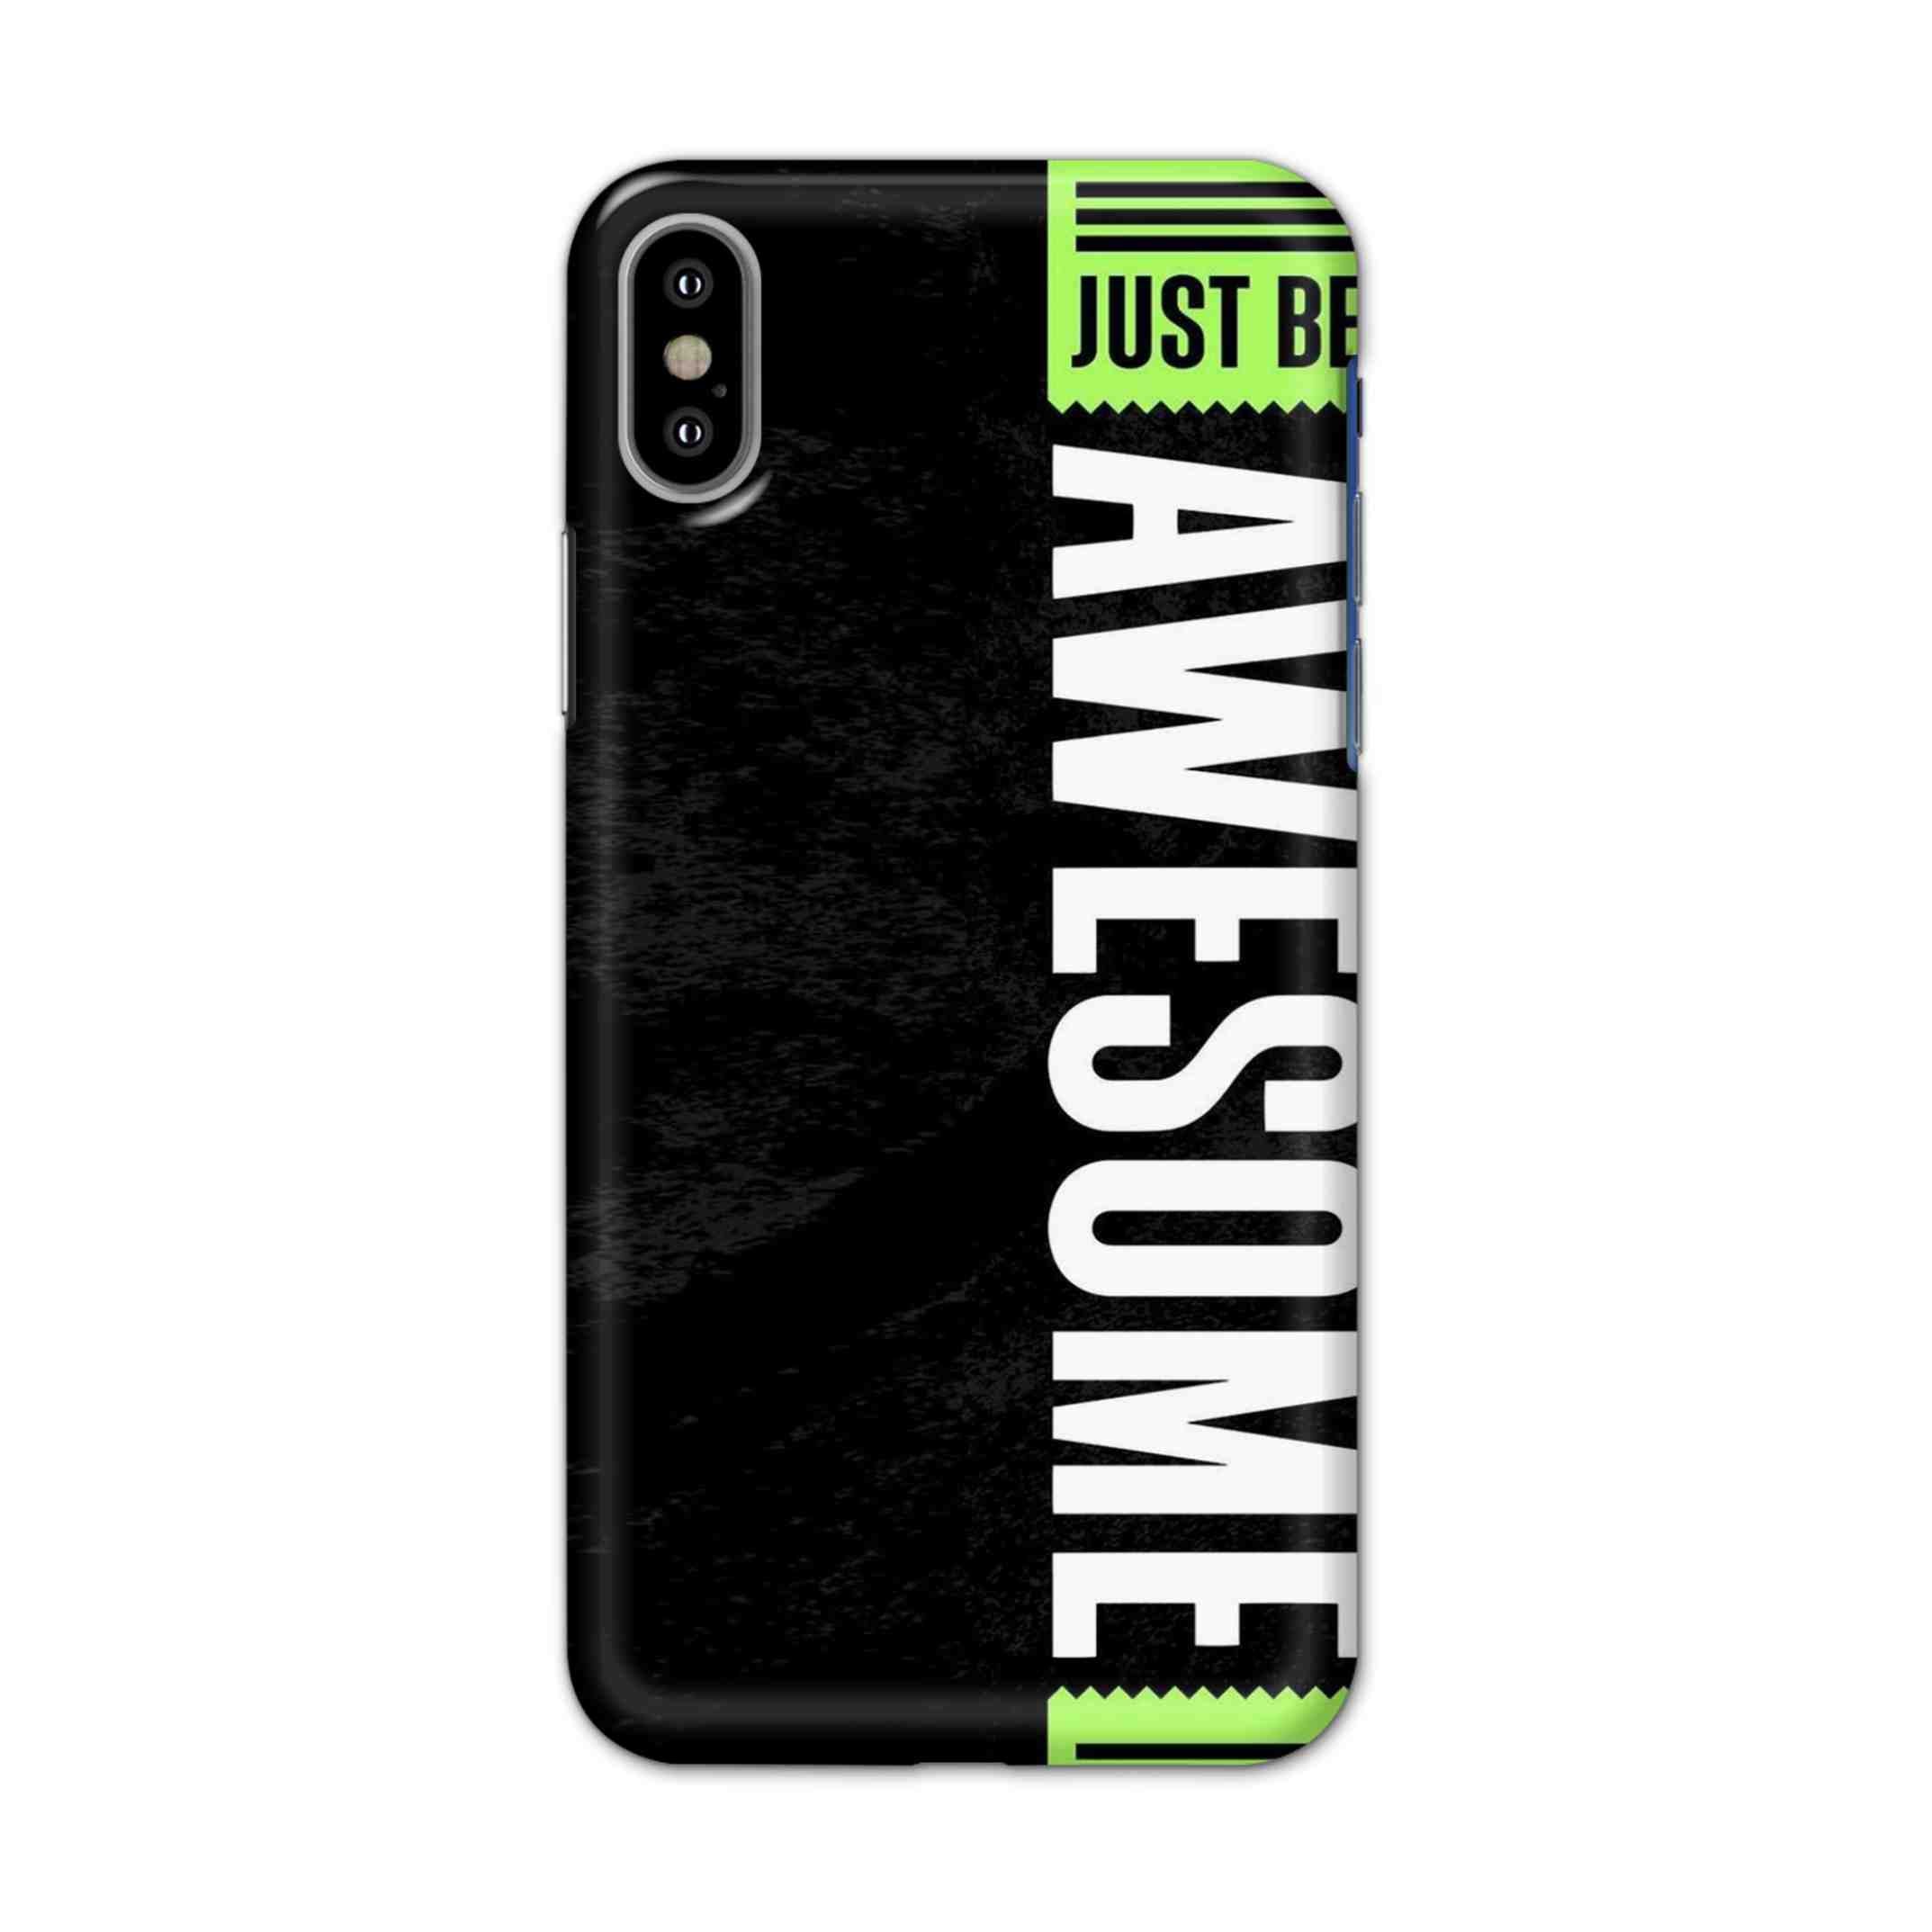 Buy Awesome Street Hard Back Mobile Phone Case/Cover For iPhone X Online